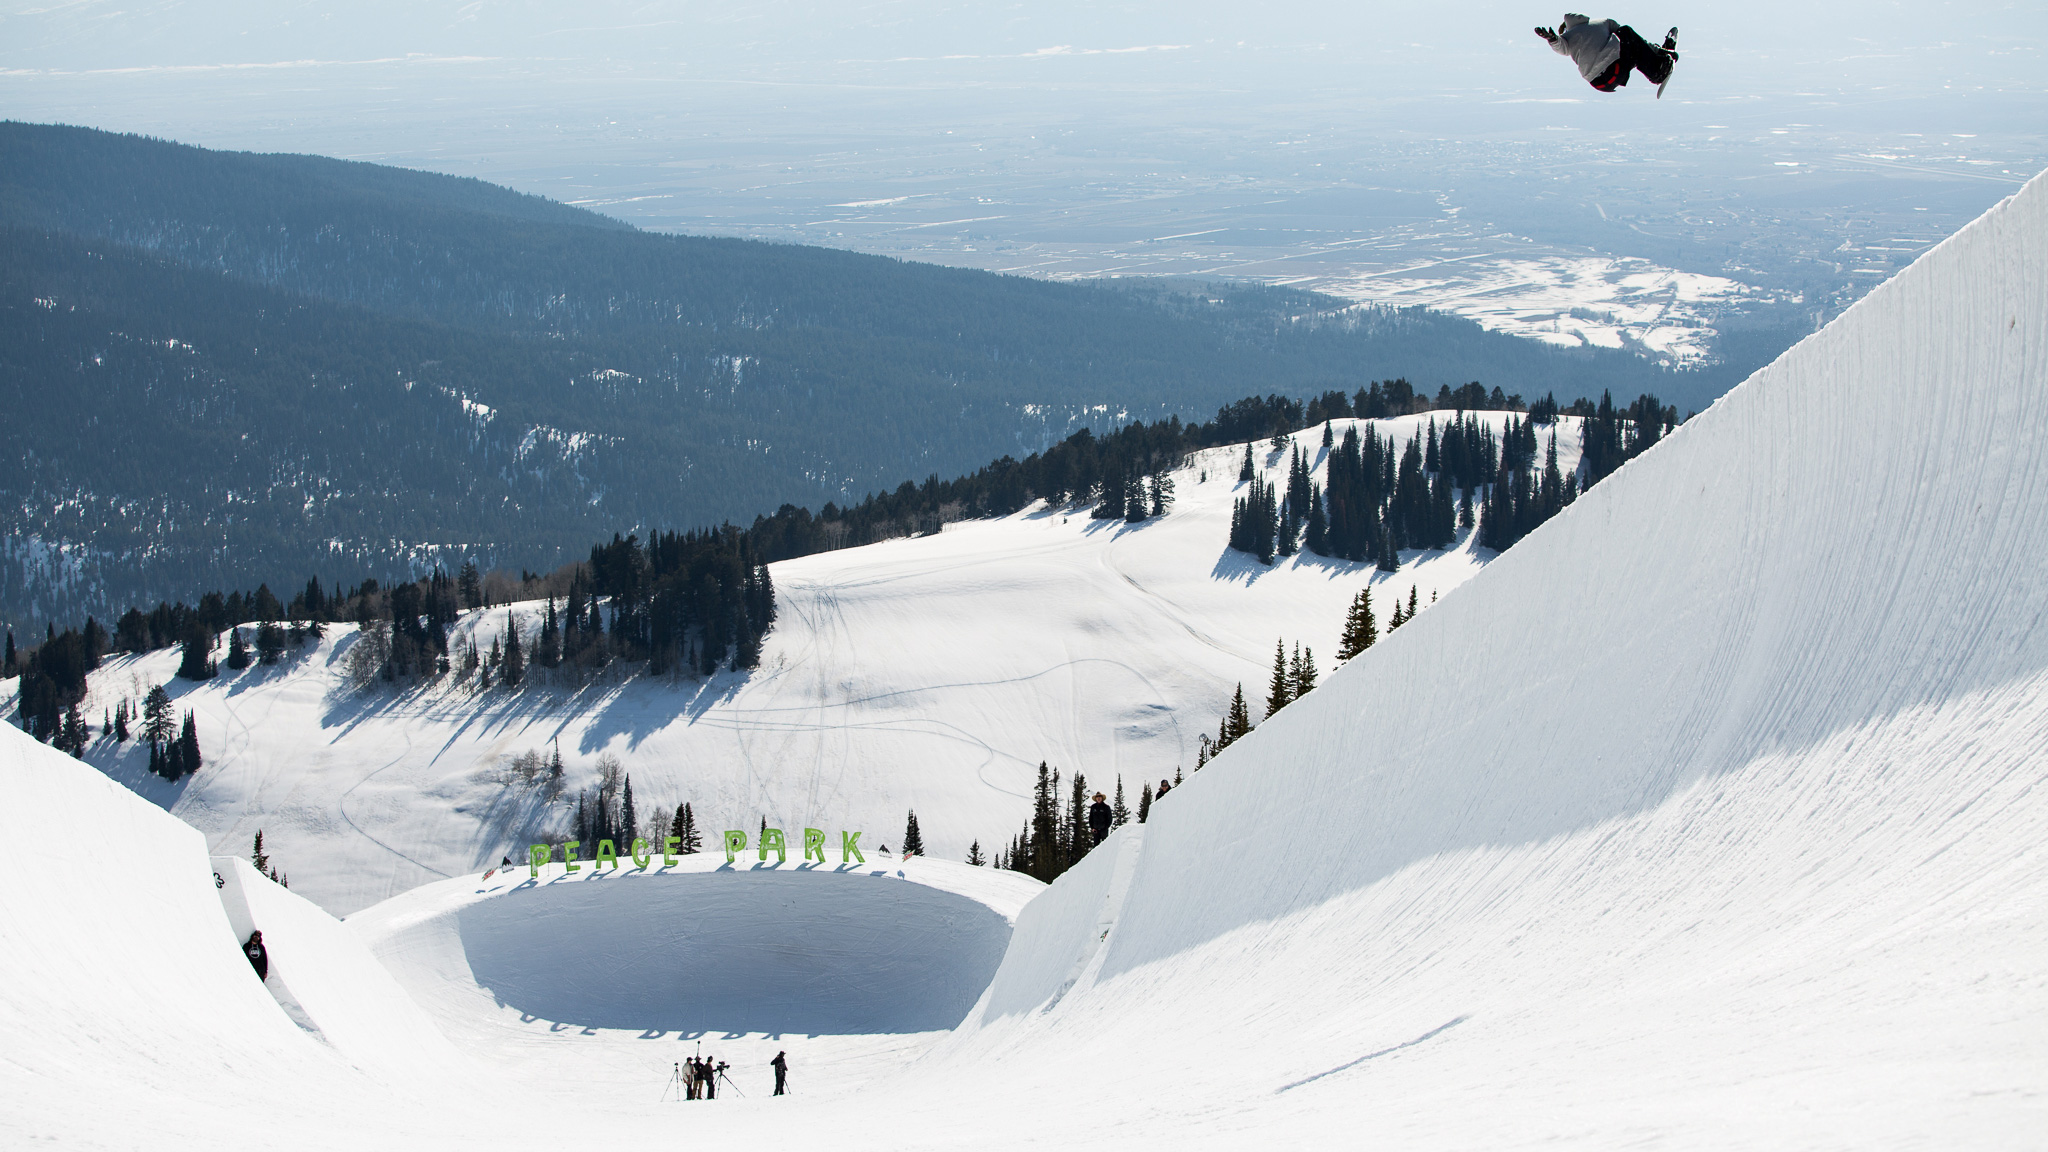 The goal of Peace Park is to cater to the kind of snowboarder who can ride anything. Case in point: slopestyle rider Mark McMorris airs out of the superpipe feature on his way to the snow bowl at the bottom of the course.